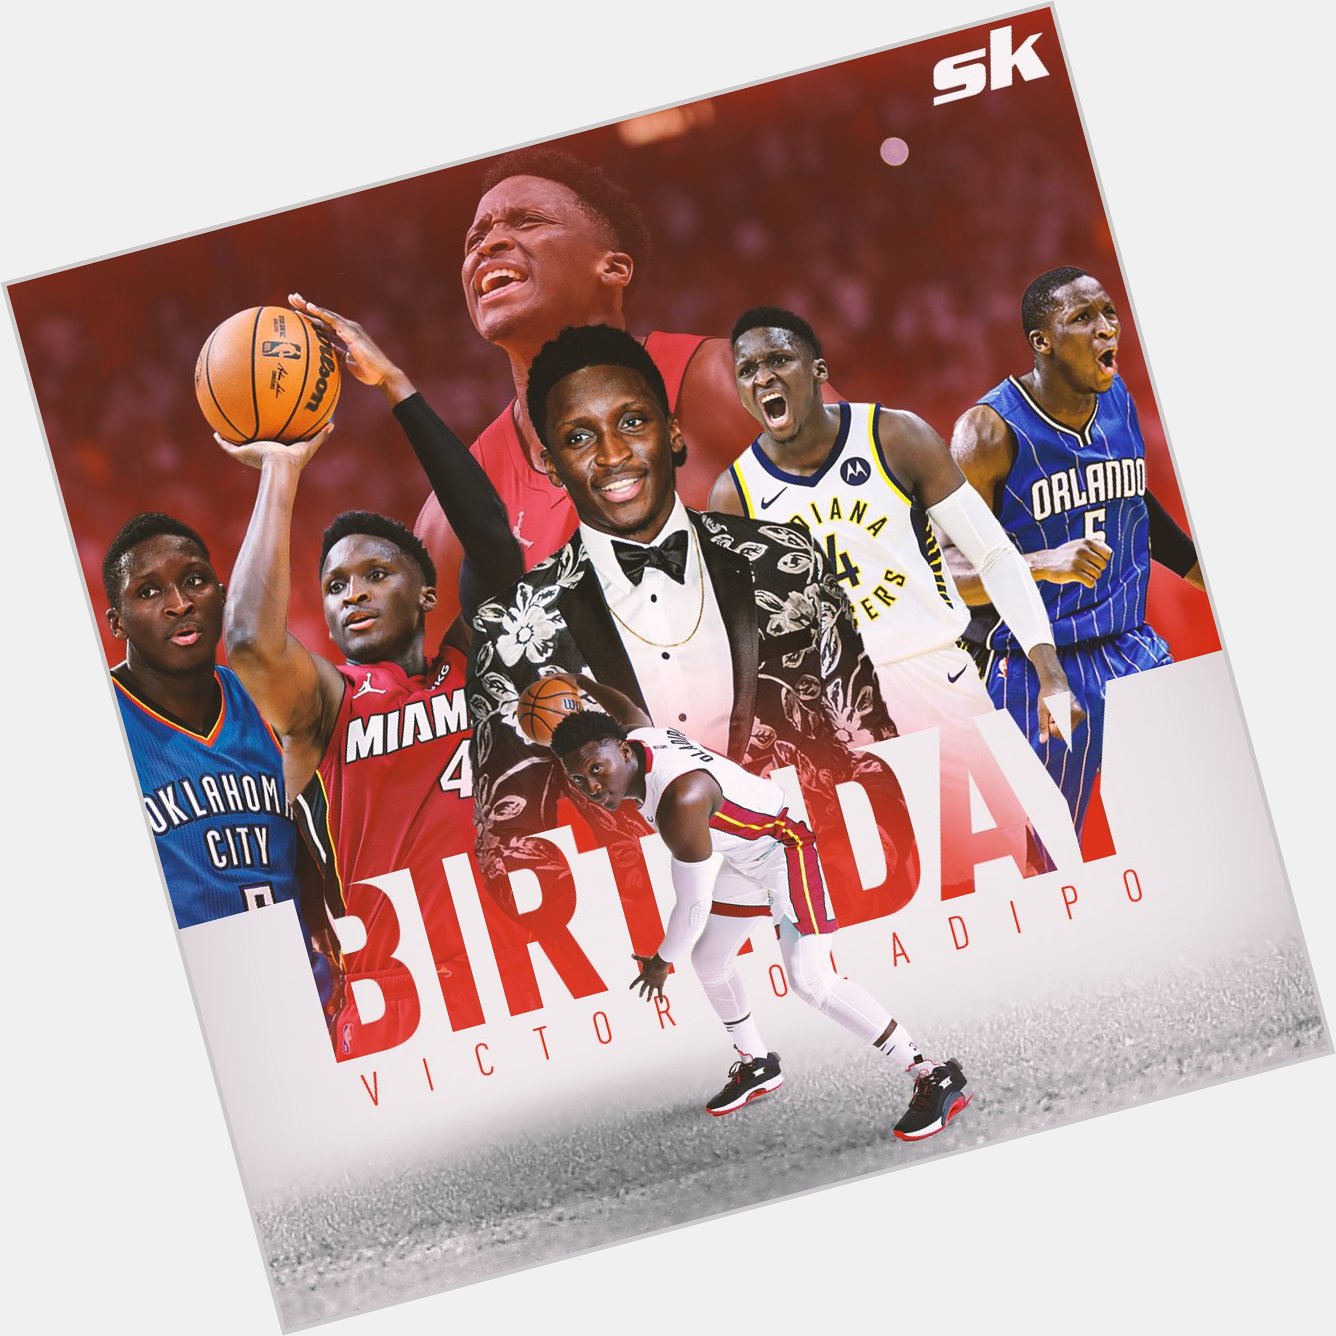  2× NBA All-Star 2018 NBA Most Improved Player 2018 NBA Steals Leader

Happy Birthday Victor Oladipo 